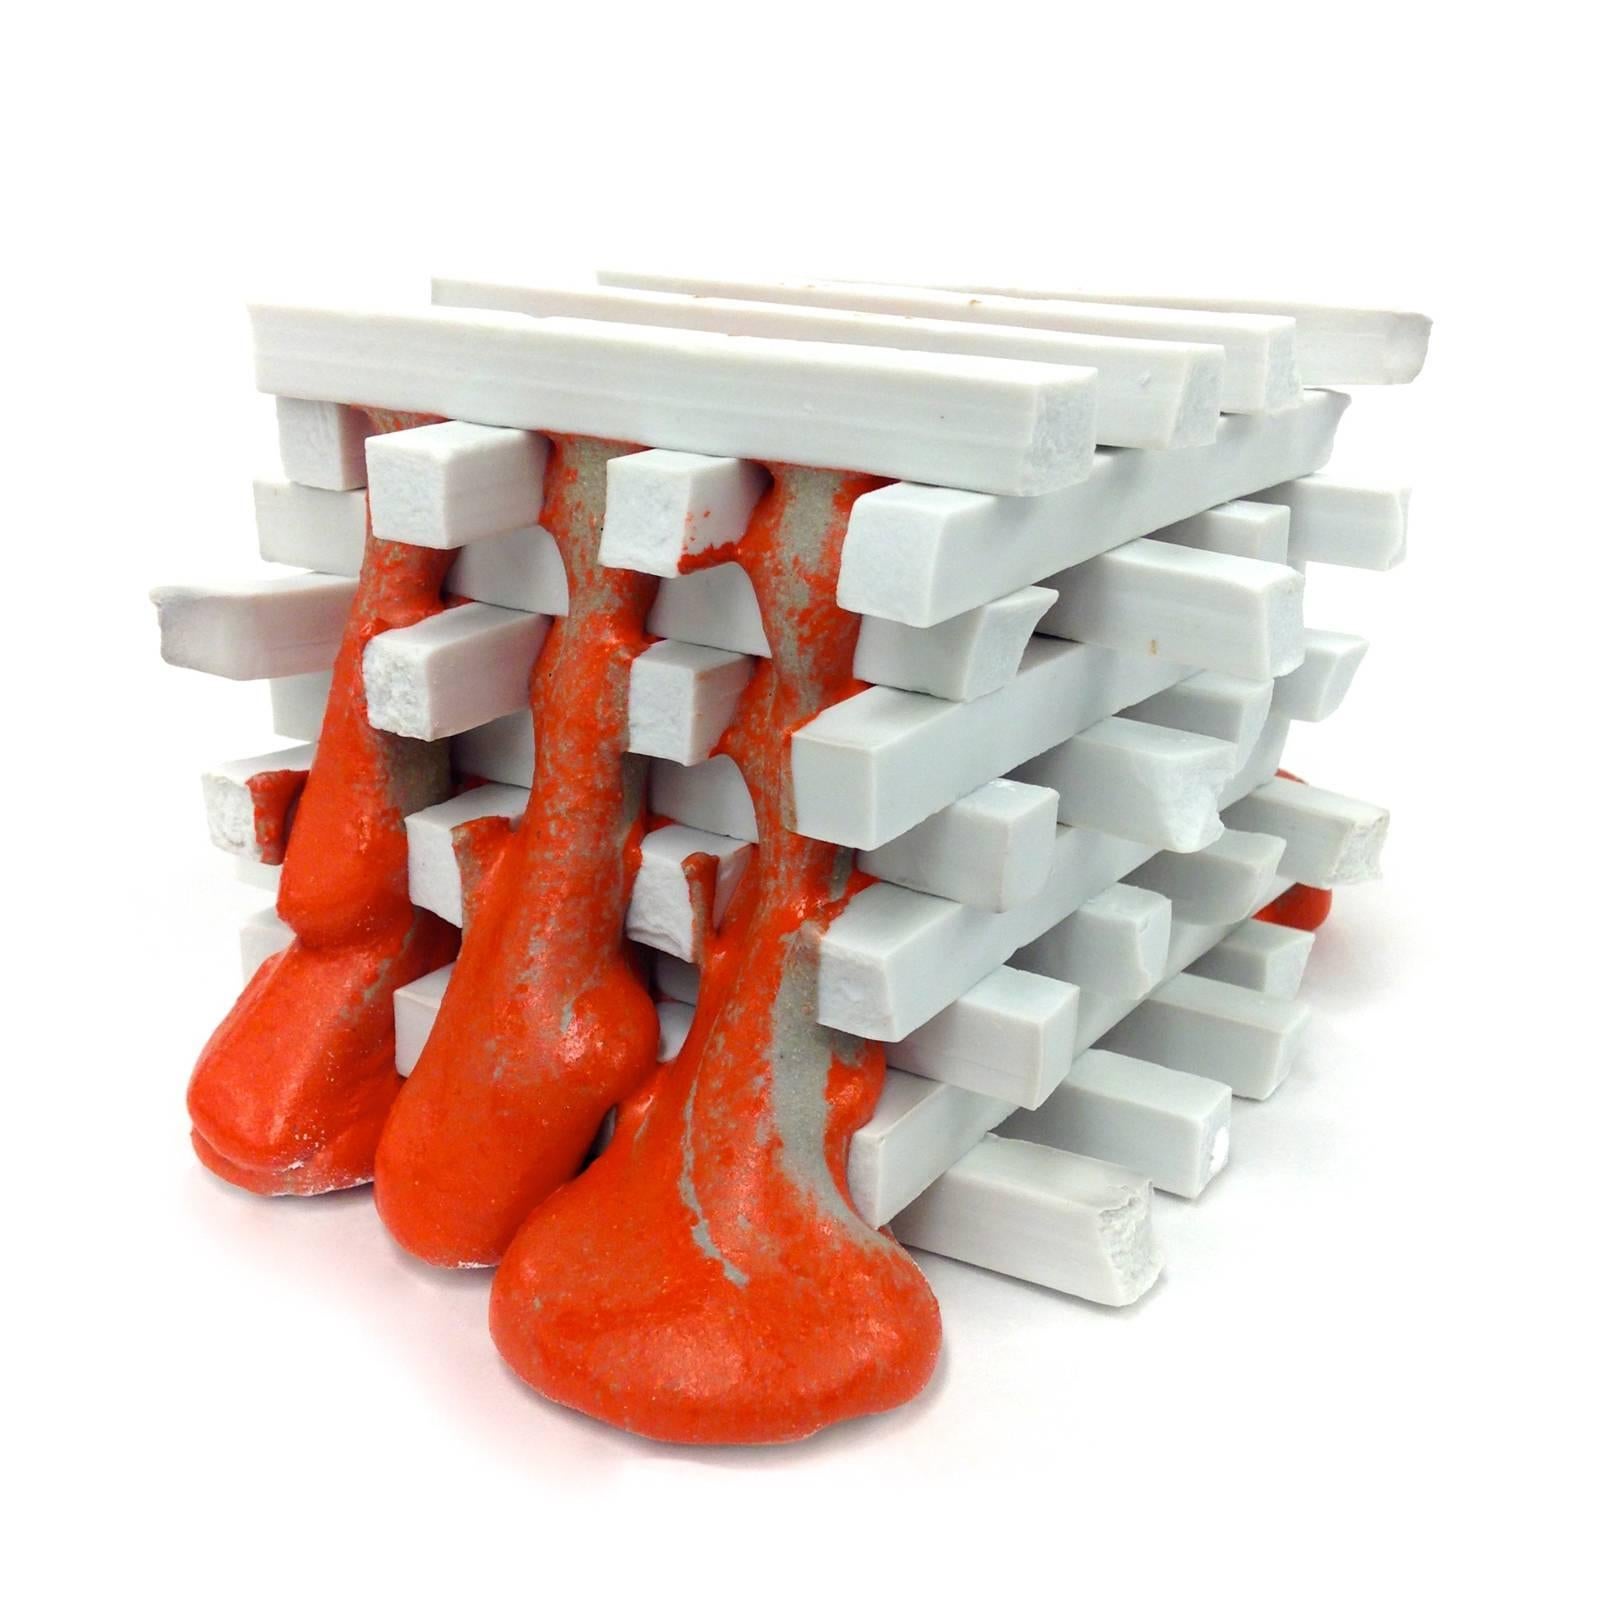 Peter Johnson Abstract Sculpture - Jenga by Peter Christian Johnson, Porcelain Construction with Dripping Glaze